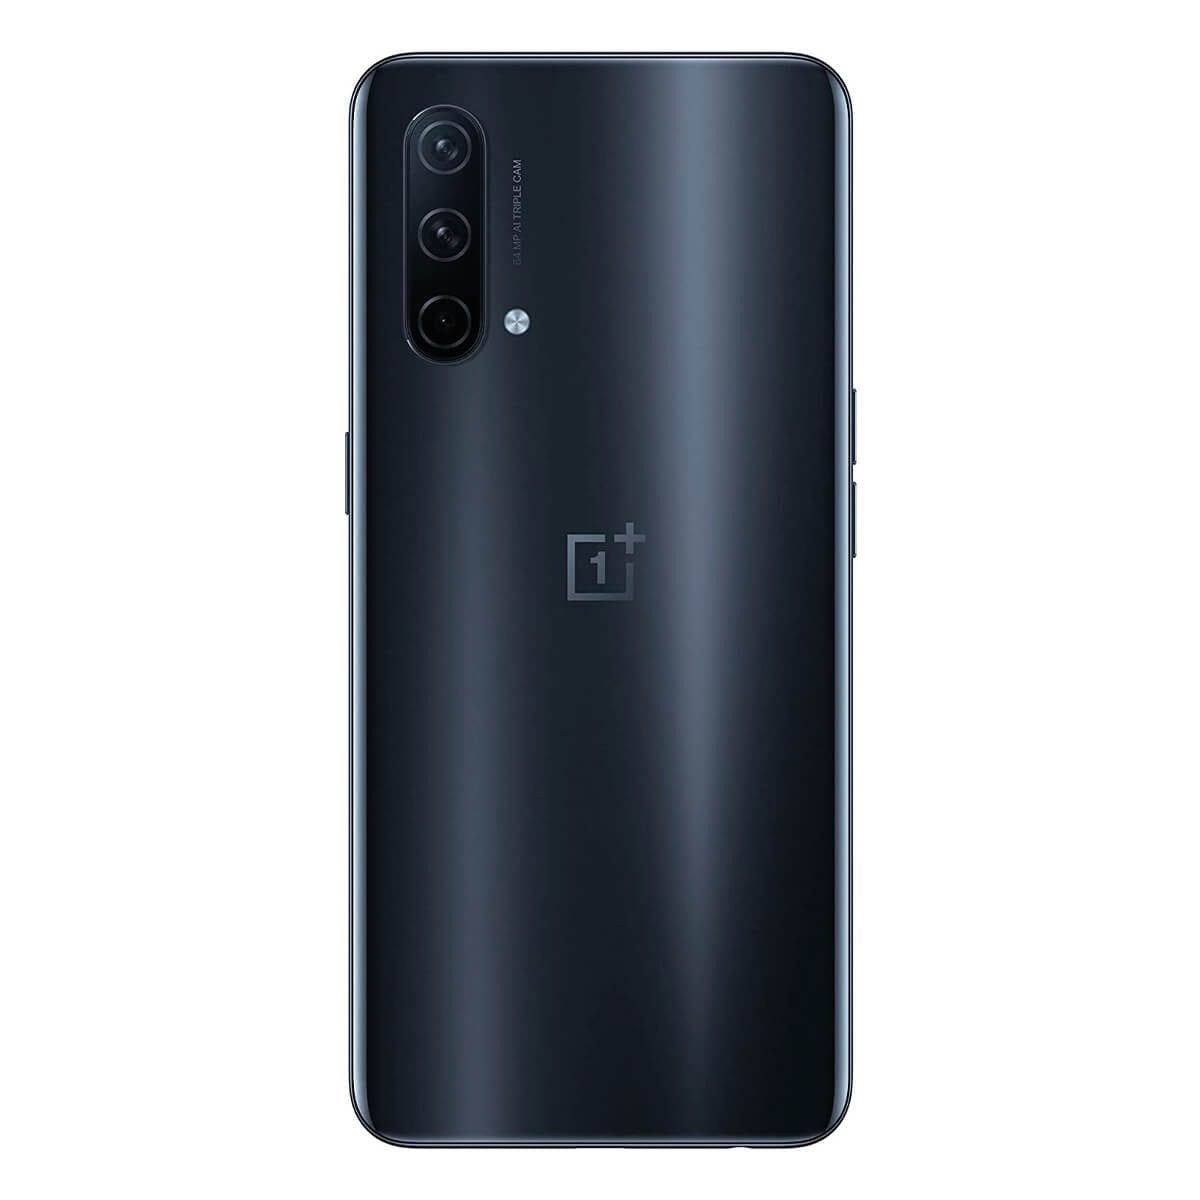 OnePlus Nord CE 5G 8GB/128GB Gris (Charcoal Ink) Dual SIM EB2103 Smartphone | OnePlus